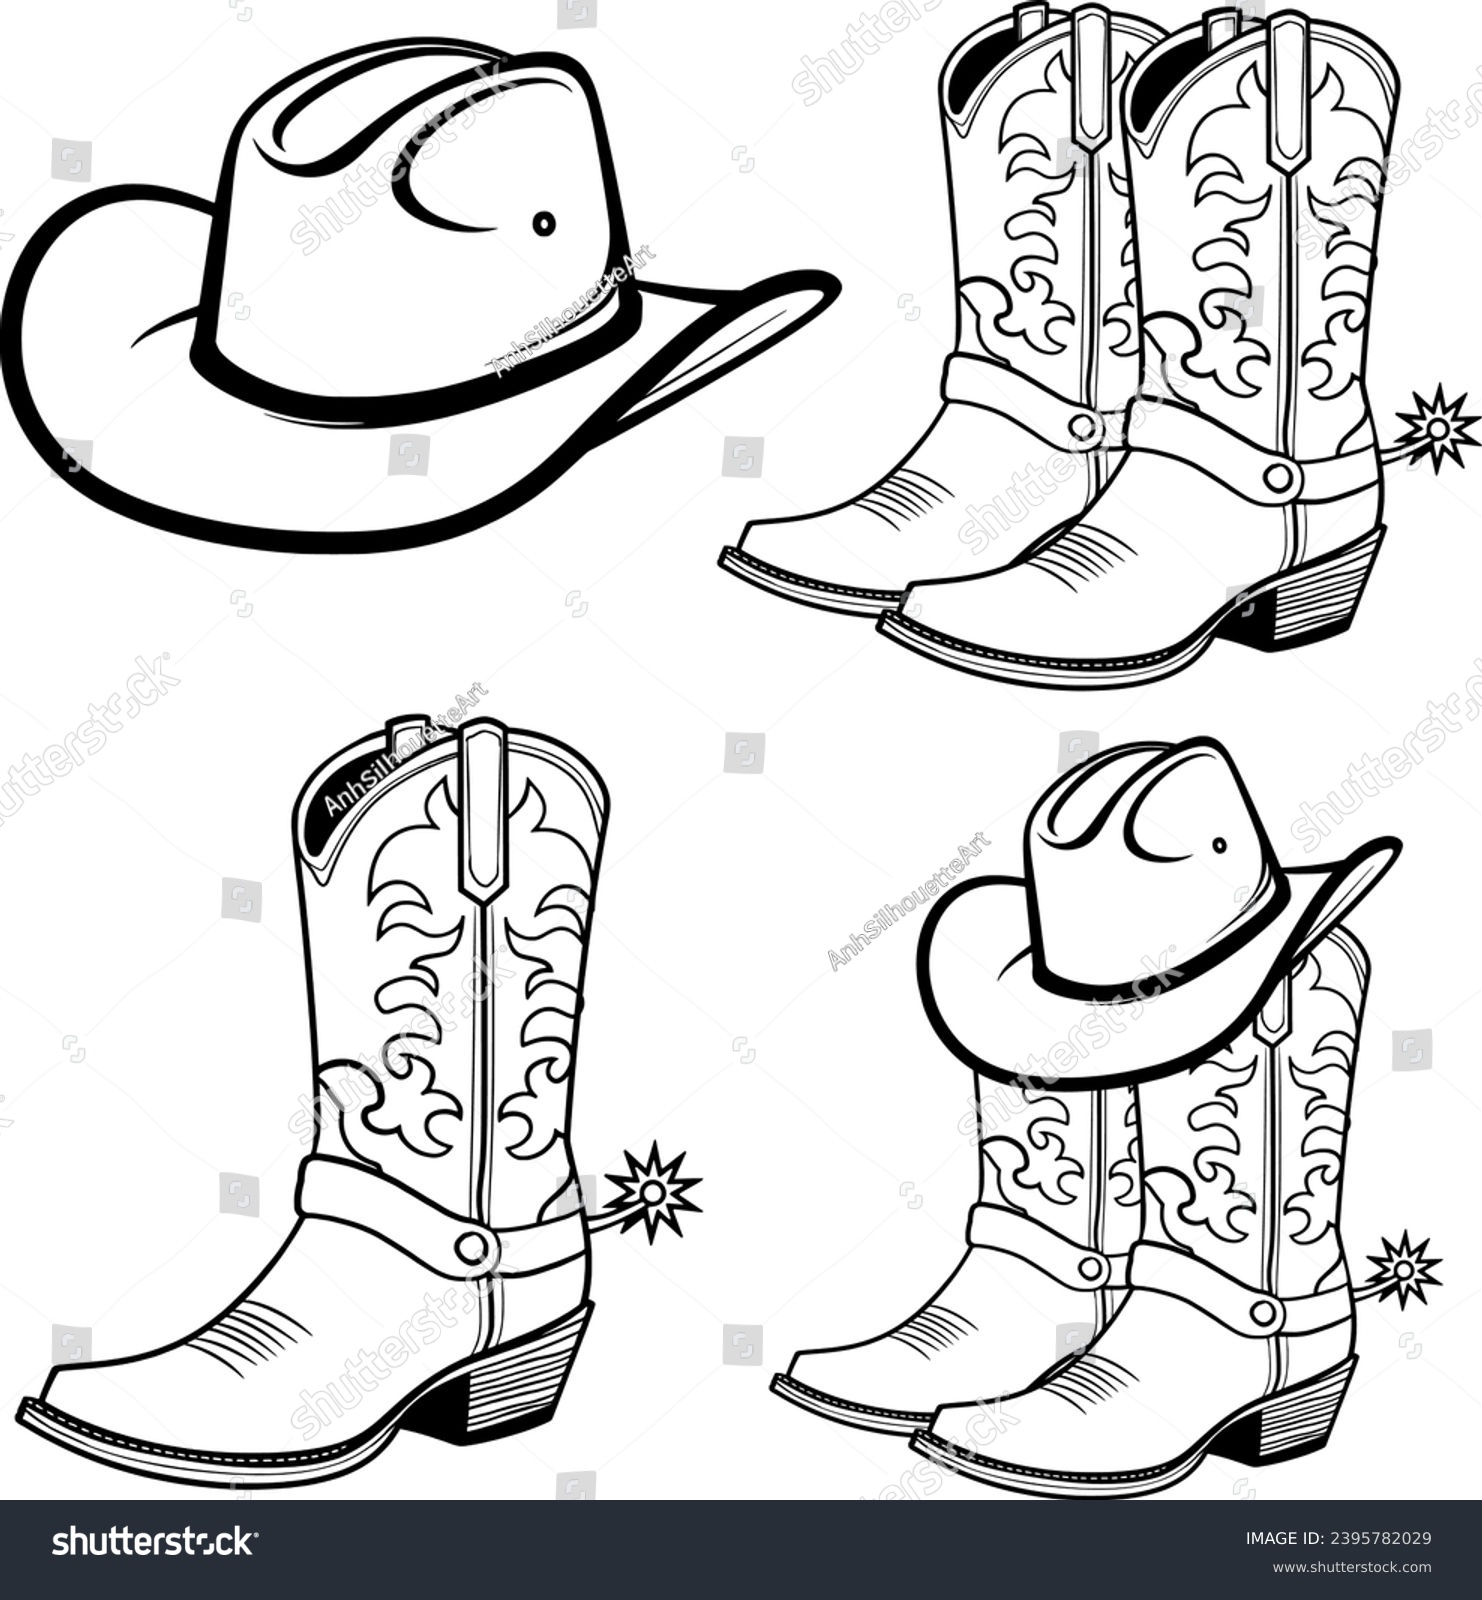 SVG of Cowboy Boots Bundle, Cowboy Boots Hand-Drawn, Cowboy Hat, Western Boots, Boots Silhouette, Rodeo, Ranch, Cowboy Hat, cowgirl boot svg